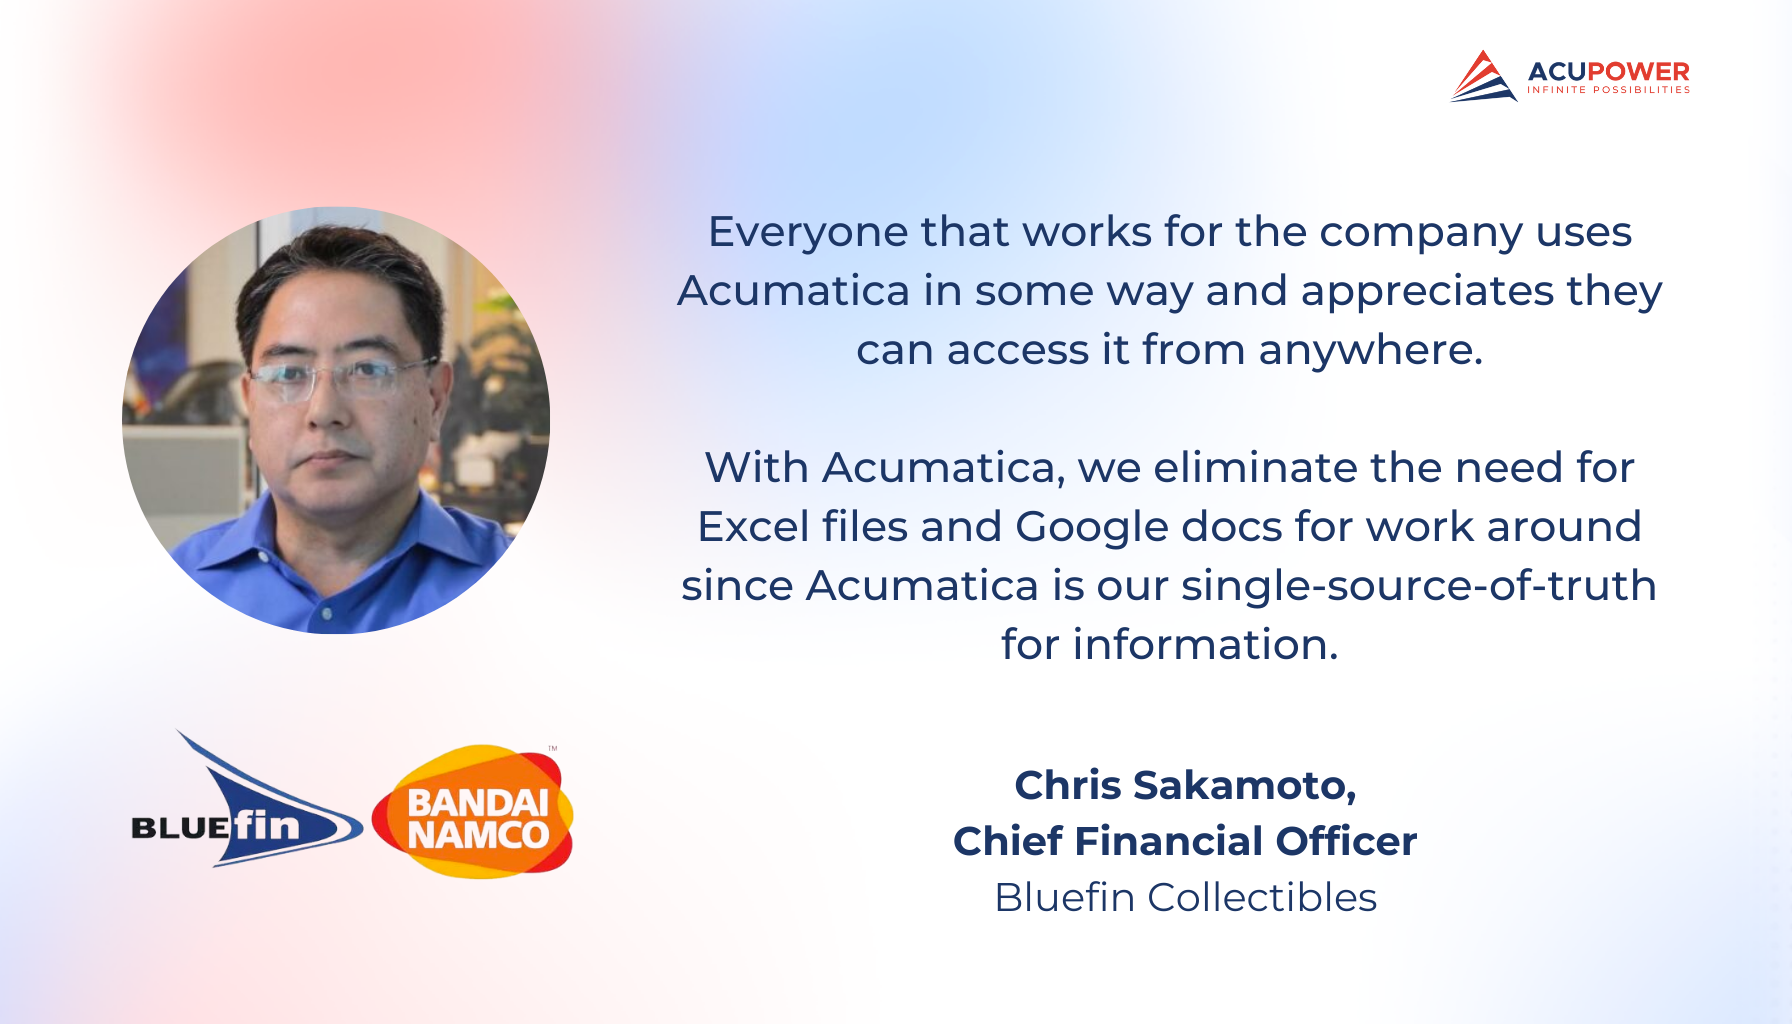 A quote of Chris Sakamoto, Chief Financial Officer of Bluefin Collectibles. Everyone that works for the company uses Acumatica in some way and appreciates they can access it from anywhere. With Acumatica, we eliminate the need for Excel files and Google docs for work around since Acumatica is our single-source-of-truth for information.